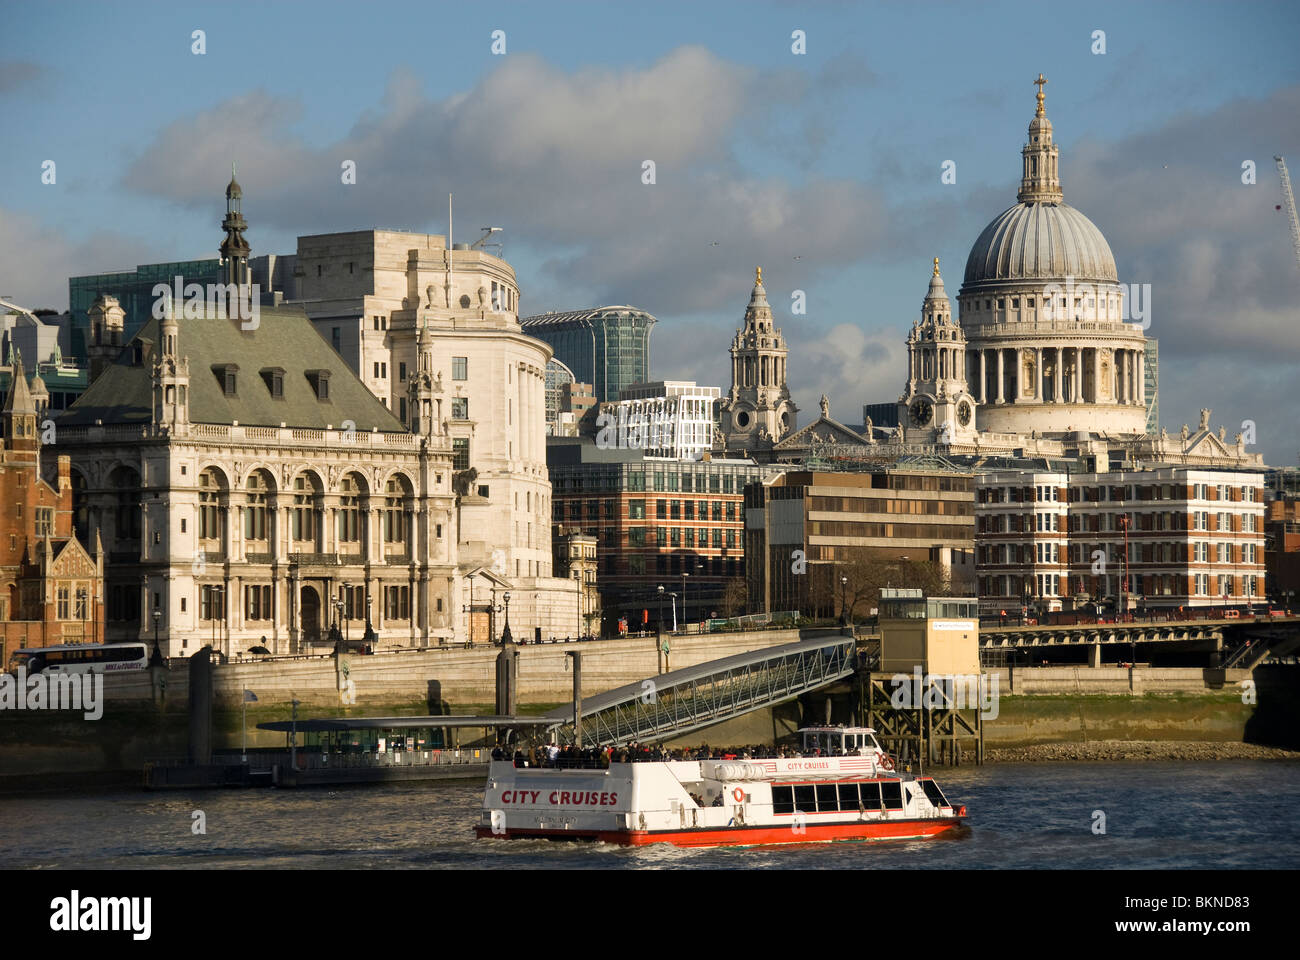 City cruise sight seeing ship, St Pauls Cathedral, London Stock Photo